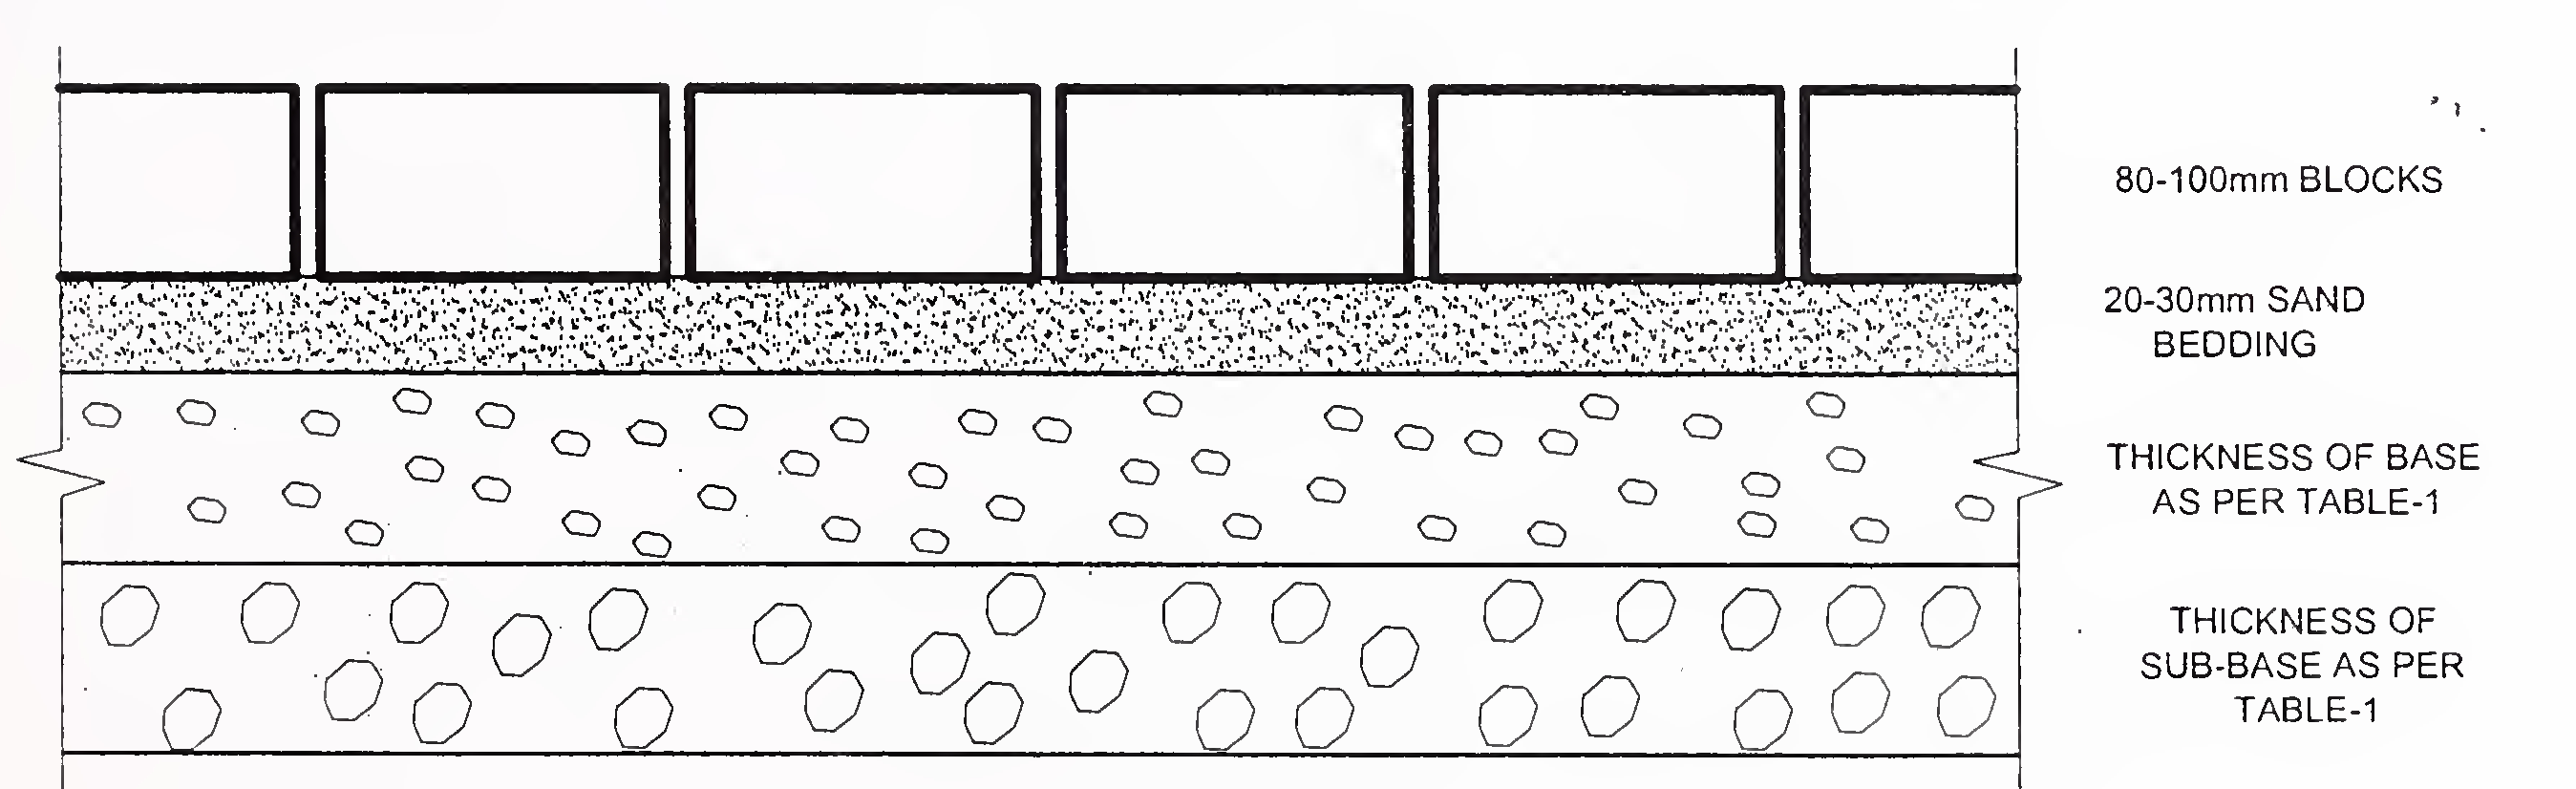 Fig. 6. A typical cross section of block pavement for heavily trafficked roads